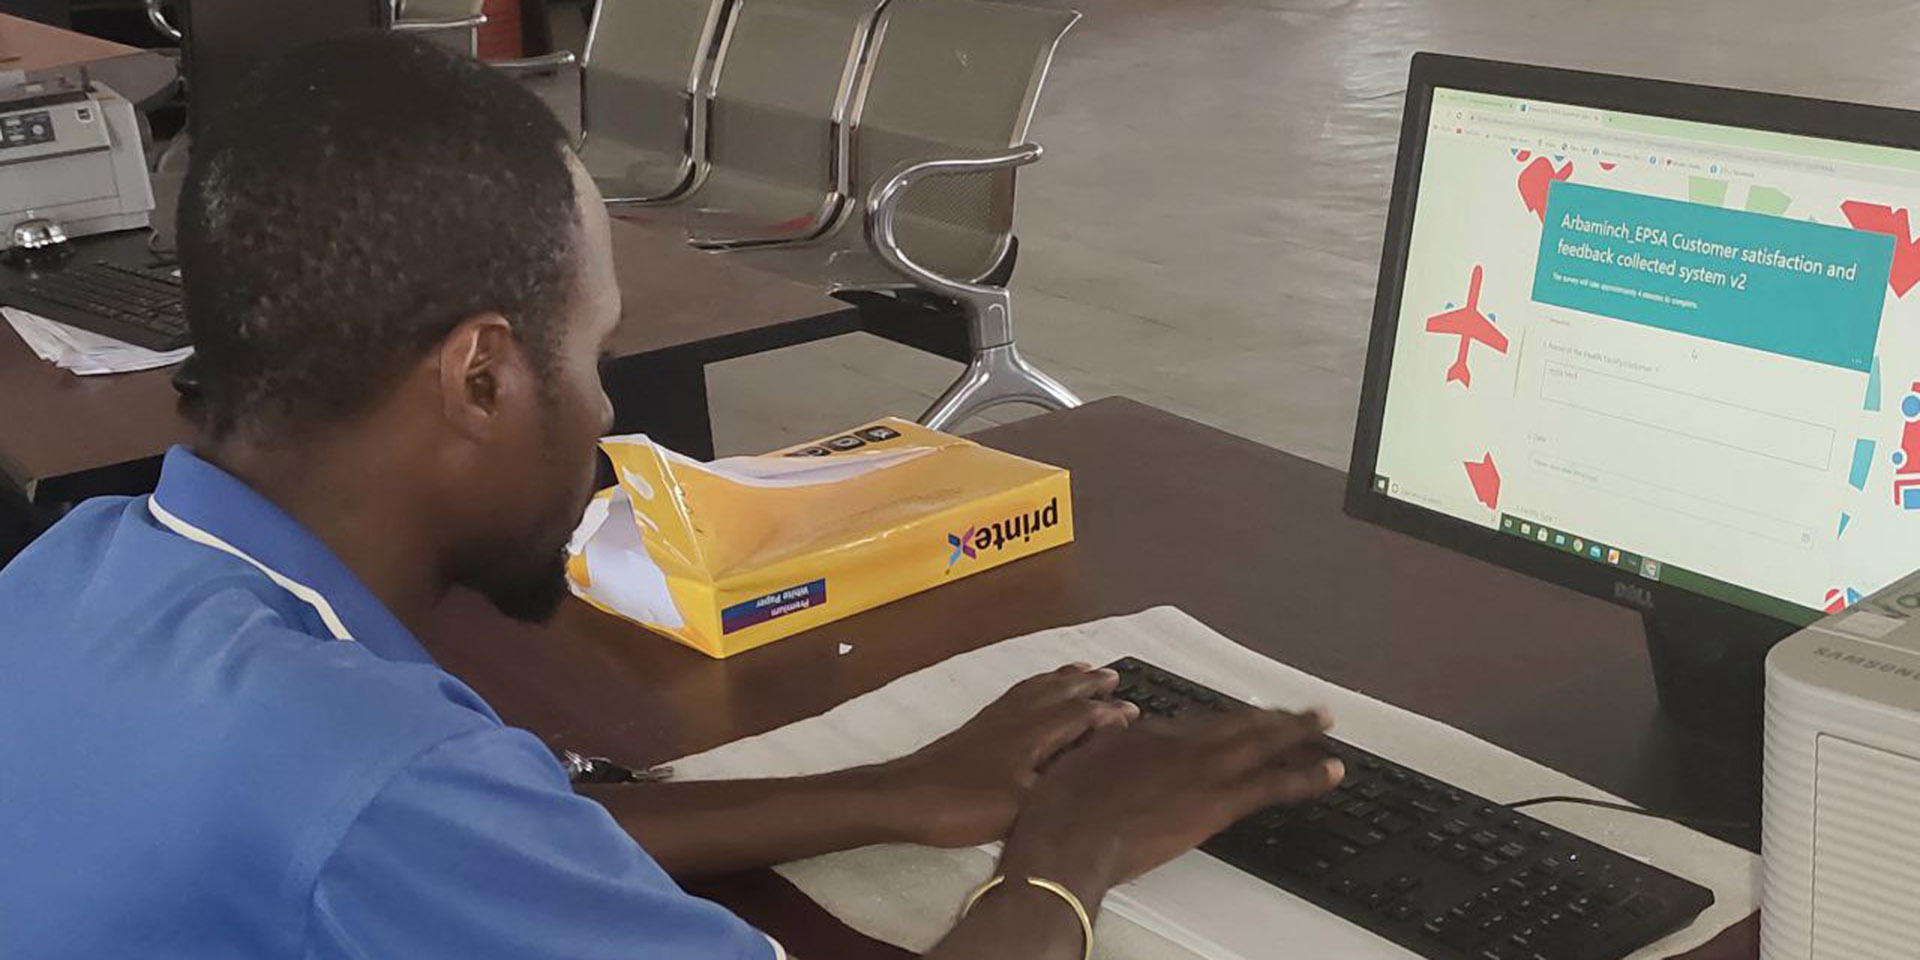 A client at the Arbaminch EPSS Hub submits his feedback to the customer satisfaction system. 